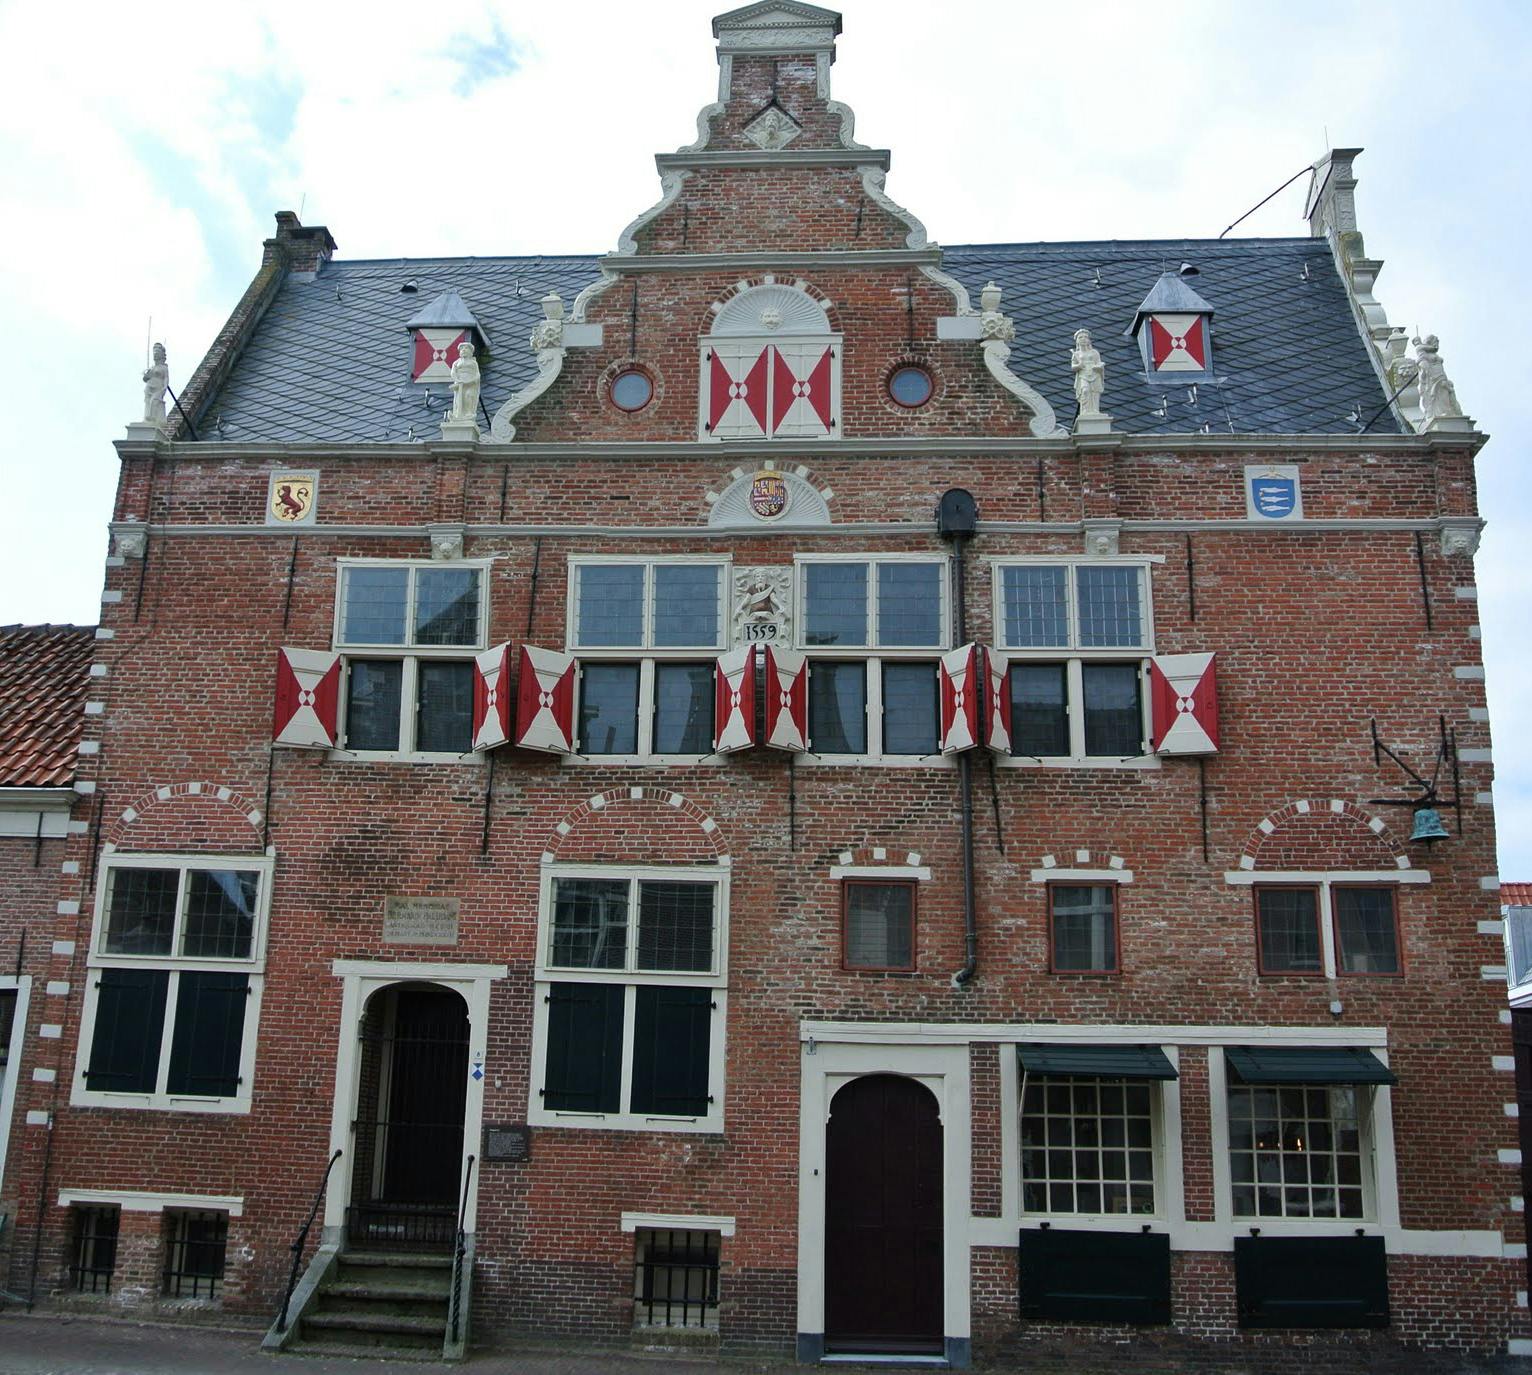 <p>The weighing house of Enkhuizen is a historic building that dates back to 1559. It was used to weigh goods that were traded in the city, such as cheese, butter, fish, and salt. The weighing house was also a symbol of the economic prosperity and civic pride of Enkhuizen, which was one of the most important ports of the Dutch Republic in the 17th century.</p><p><br></p><p>The weighing house is a fine example of the early Renaissance style in the northern Netherlands. It has a stepped gable, a clock tower, and a richly decorated façade with sculptures and coats of arms. The interior of the weighing house has been preserved, including the original weighing mechanism and scales.</p><p><br></p><p>On the first floor of the weighing house, there was a surgeon’s room, where the surgeon’s guild of Enkhuizen held meetings and lectures. The stained glass windows of this room bear the names of the surgeons and doctors who worked in Enkhuizen between 1639 and 1654. The surgeon’s room also contains a collection of medical instruments and anatomical models from the 17th and 18th centuries.</p><p><br></p><p>The weighing house of Enkhuizen is now a museum that showcases the history and culture of the city. It is part of the Zuiderzee Museum, which also includes an open-air museum with historical buildings from the region. The weighing house is open to visitors from April to October, from 10:00 to 17:00.</p><p><br></p><p><u>Some additional information or questions that you might find interesting are</u></p><p><br></p><p>Enkhuizen was one of the founding cities of the Dutch East India Company (VOC), which was the first multinational corporation and the largest trading company in the world. The weighing house of Enkhuizen was also used to weigh the spices and other exotic goods that the VOC brought back from Asia.</p><p><br></p><p>The weighing house of Enkhuizen has a special connection to the famous Dutch painter Rembrandt van Rijn. In 1636, he painted a portrait of the surgeon Nicolaes Tulp, who was a member of the surgeon’s guild of Enkhuizen and had his name on one of the stained glass windows of the weighing house. The portrait, known as The Anatomy Lesson of Dr. Nicolaes Tulp, is one of Rembrandt’s most famous works and shows Tulp dissecting a corpse in front of his students.</p>